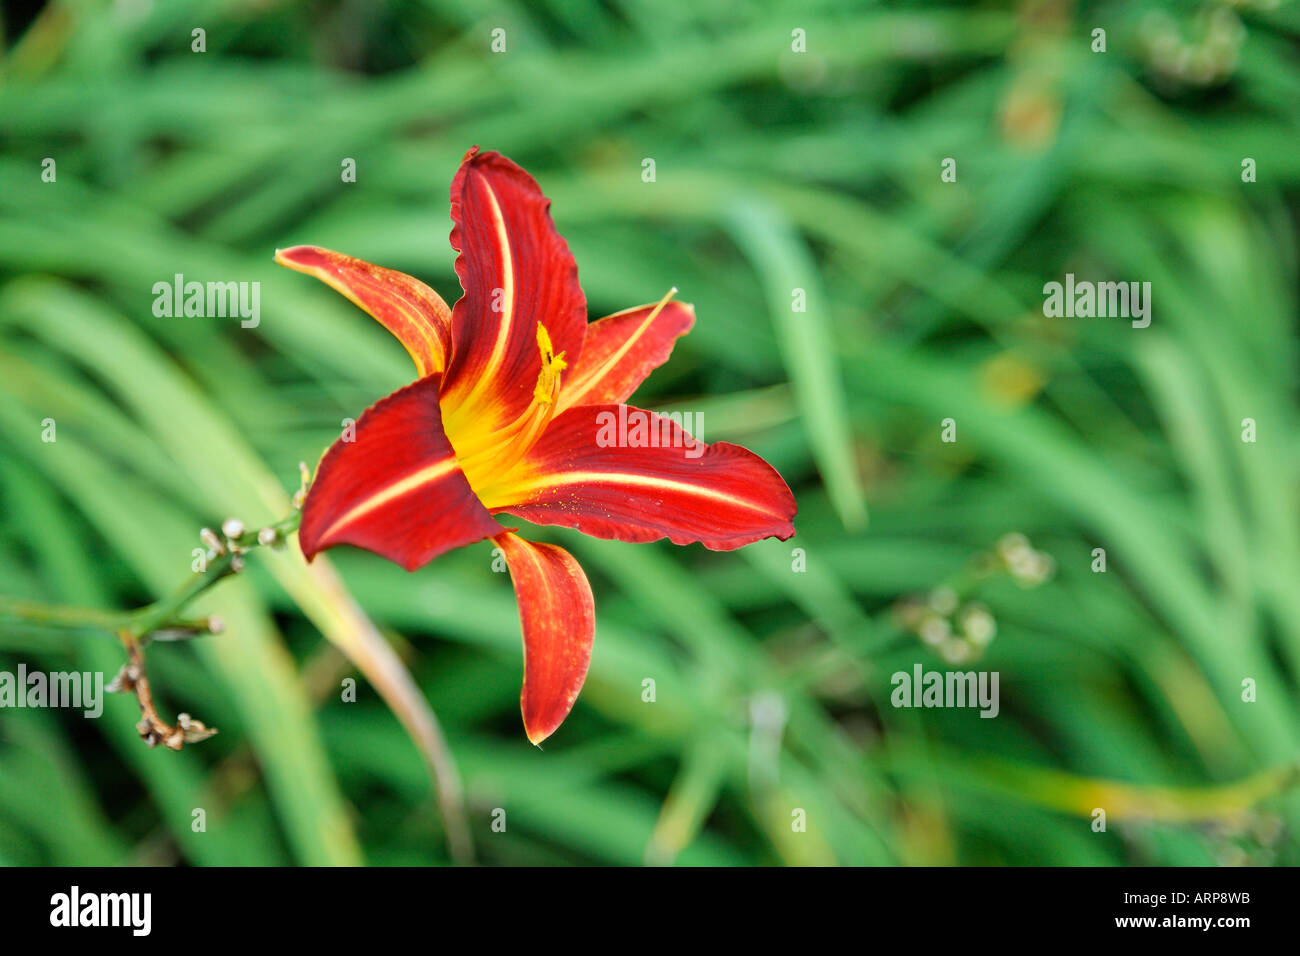 A Close Up Shot of a Red and Yellow Stafford Daylily Stock Photo